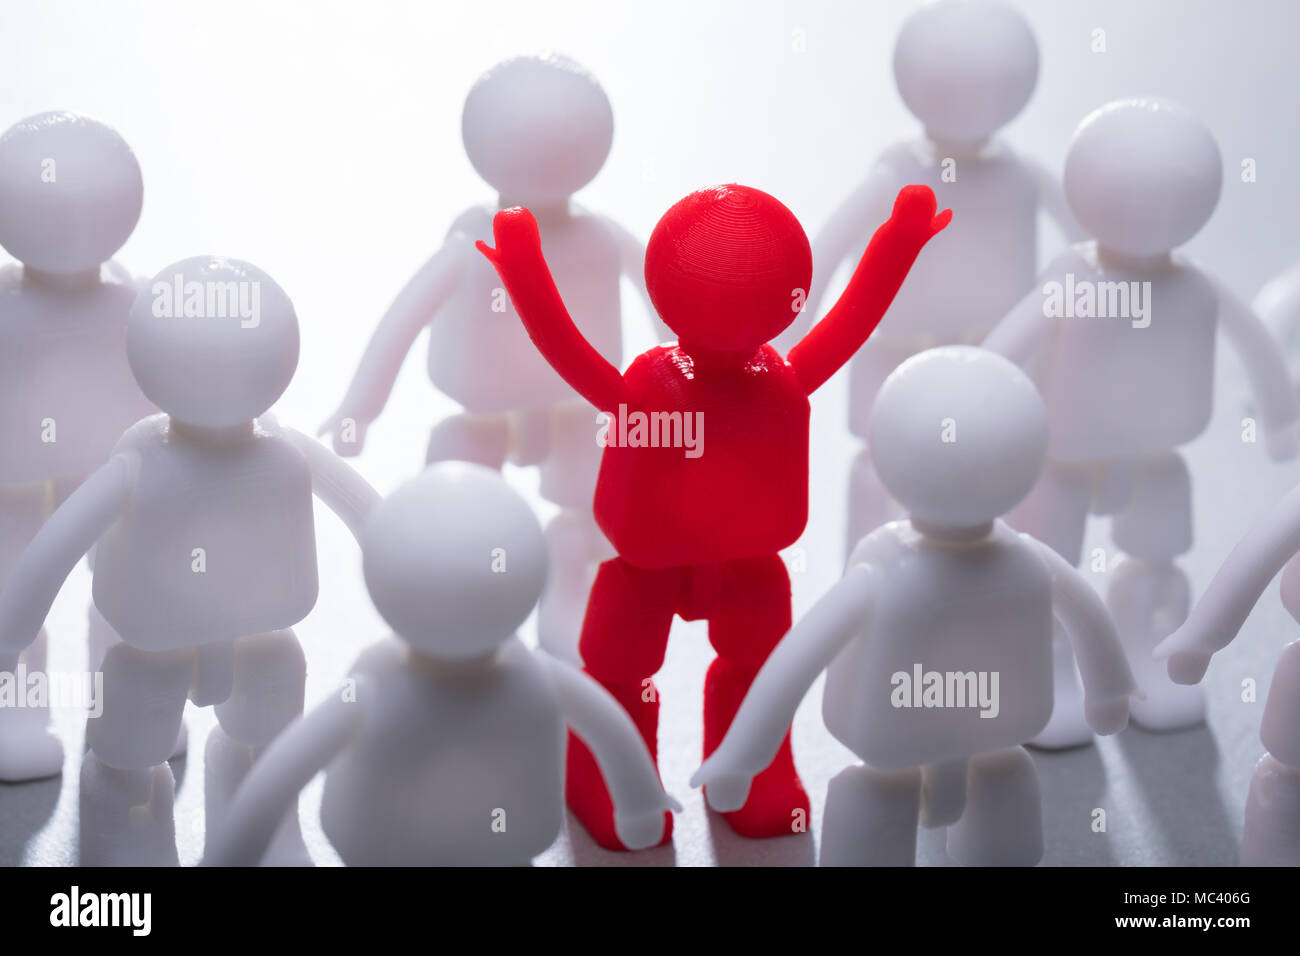 Red Human Figure Surrounded By Team Representing Unity Stock Photo